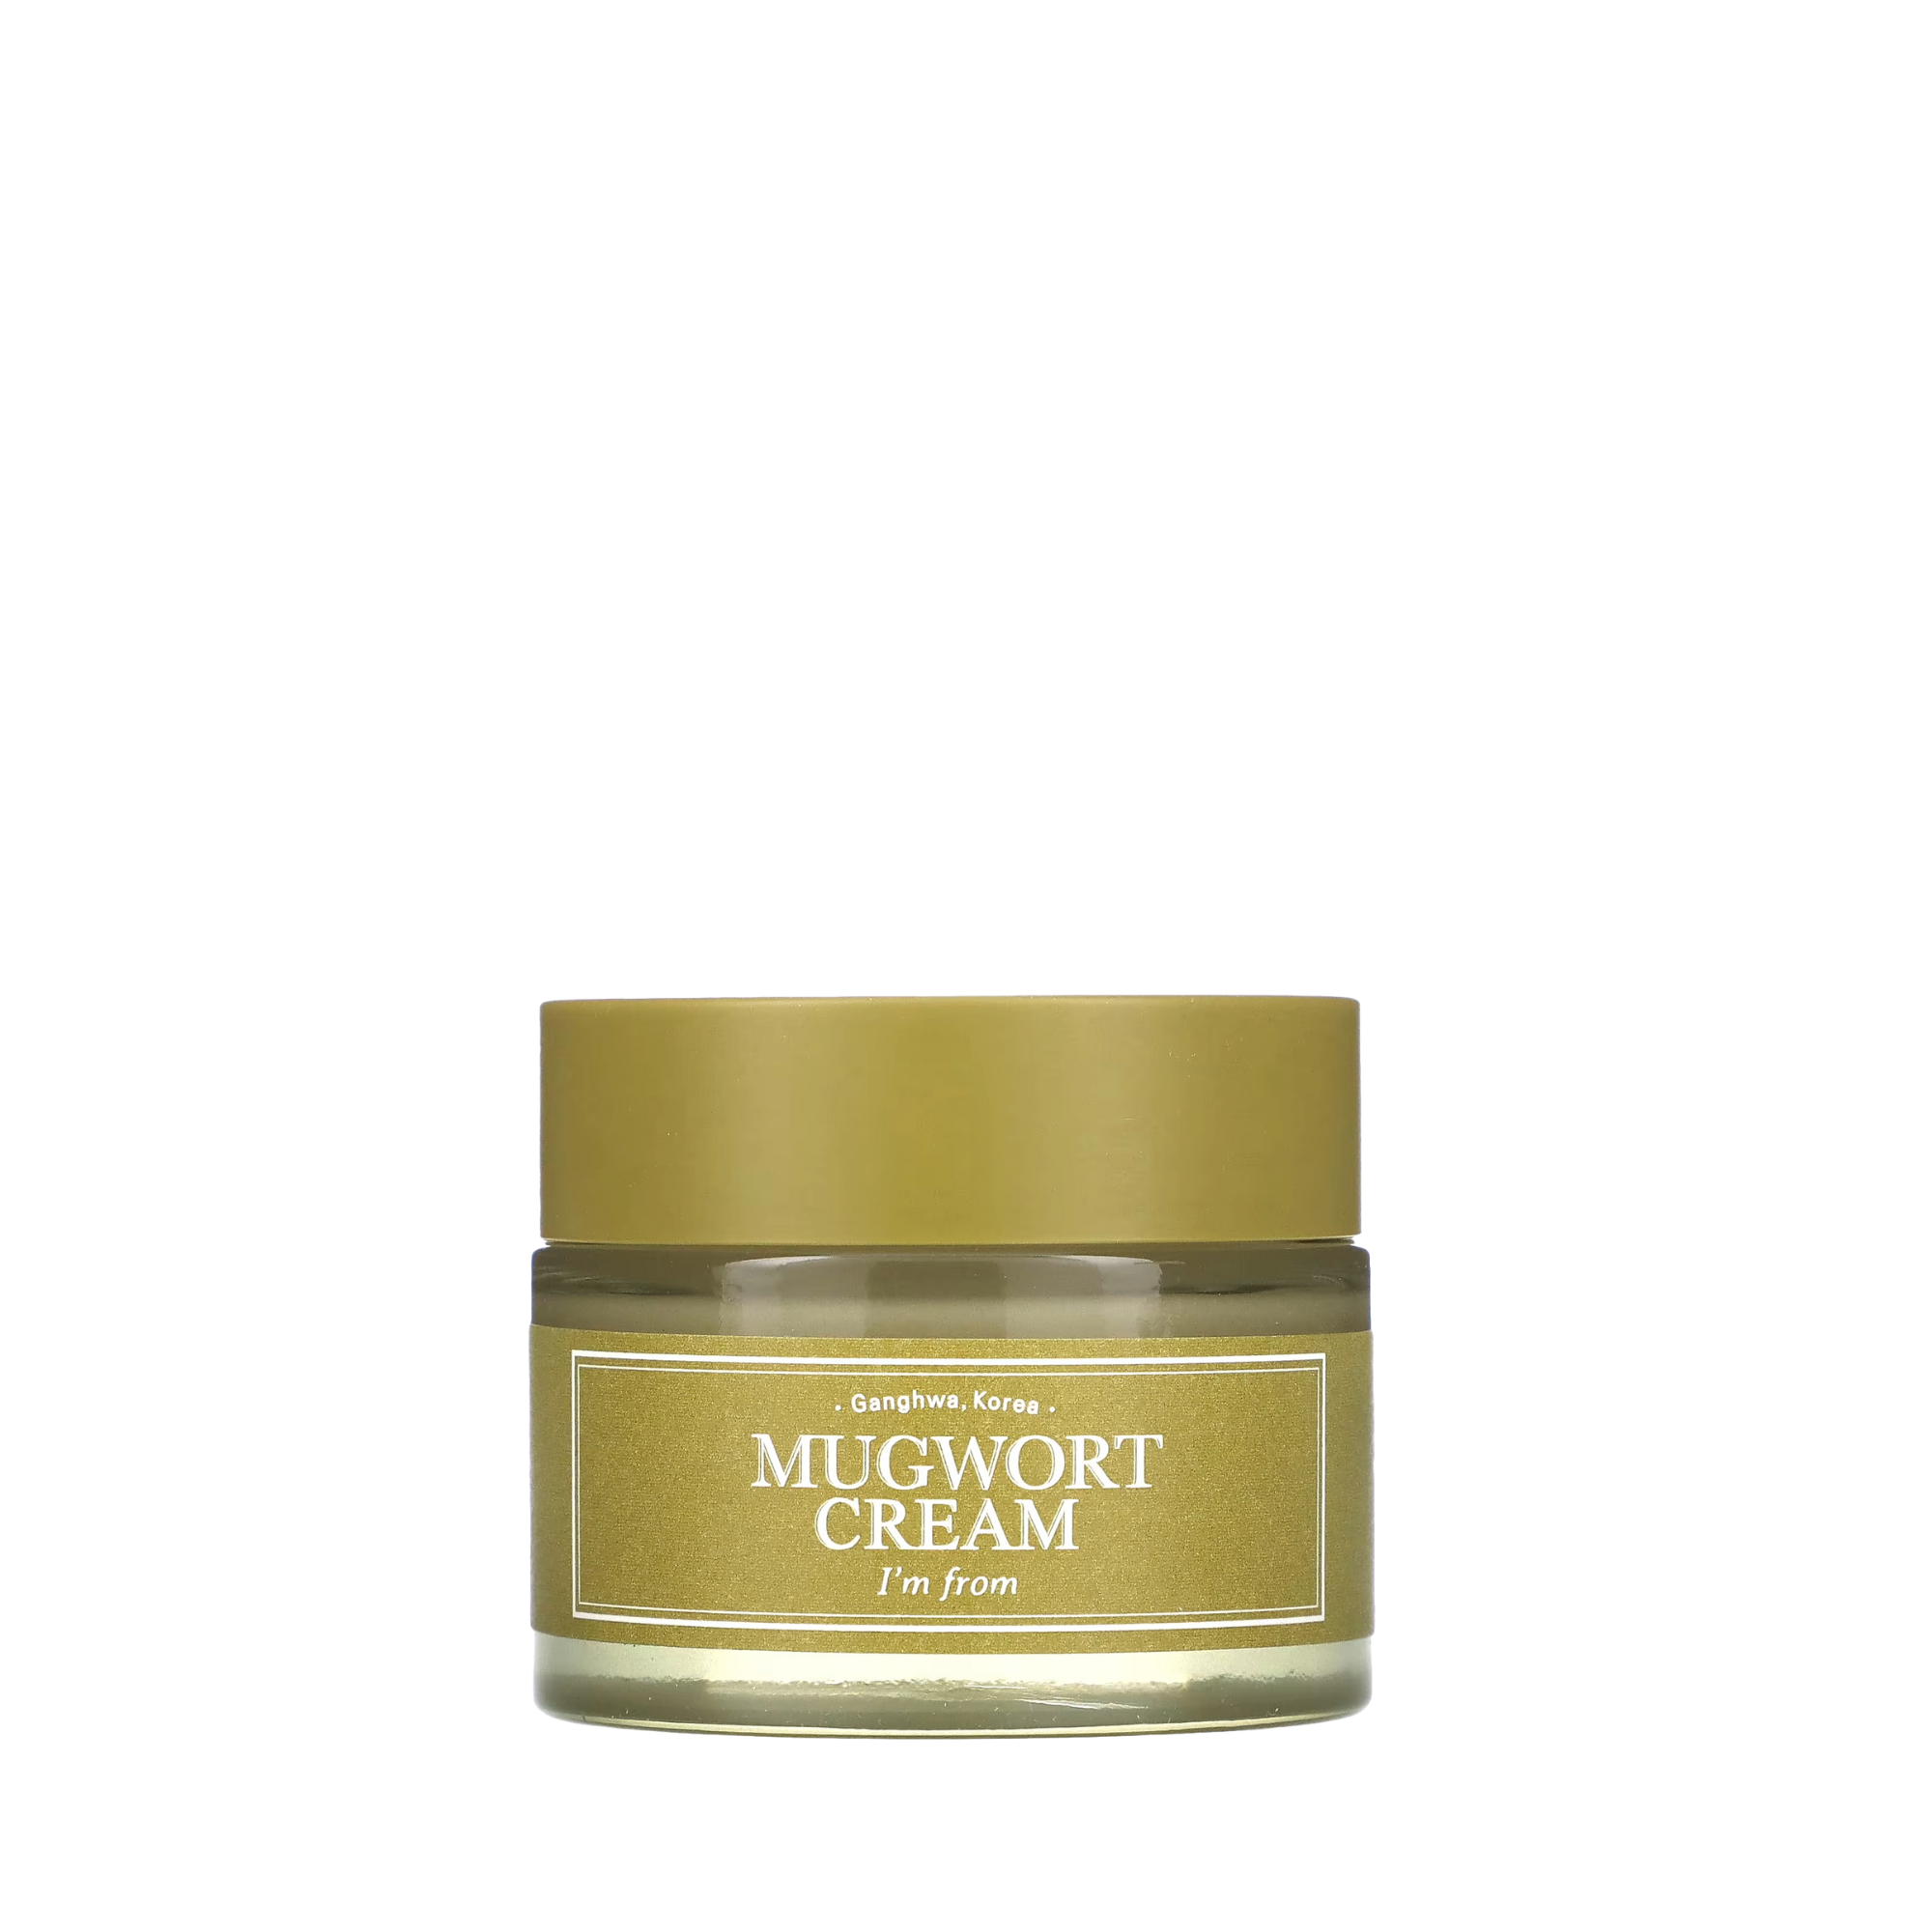 Facial cream with mugwort extract by  I'm From (I'm From Mugwort Cream)